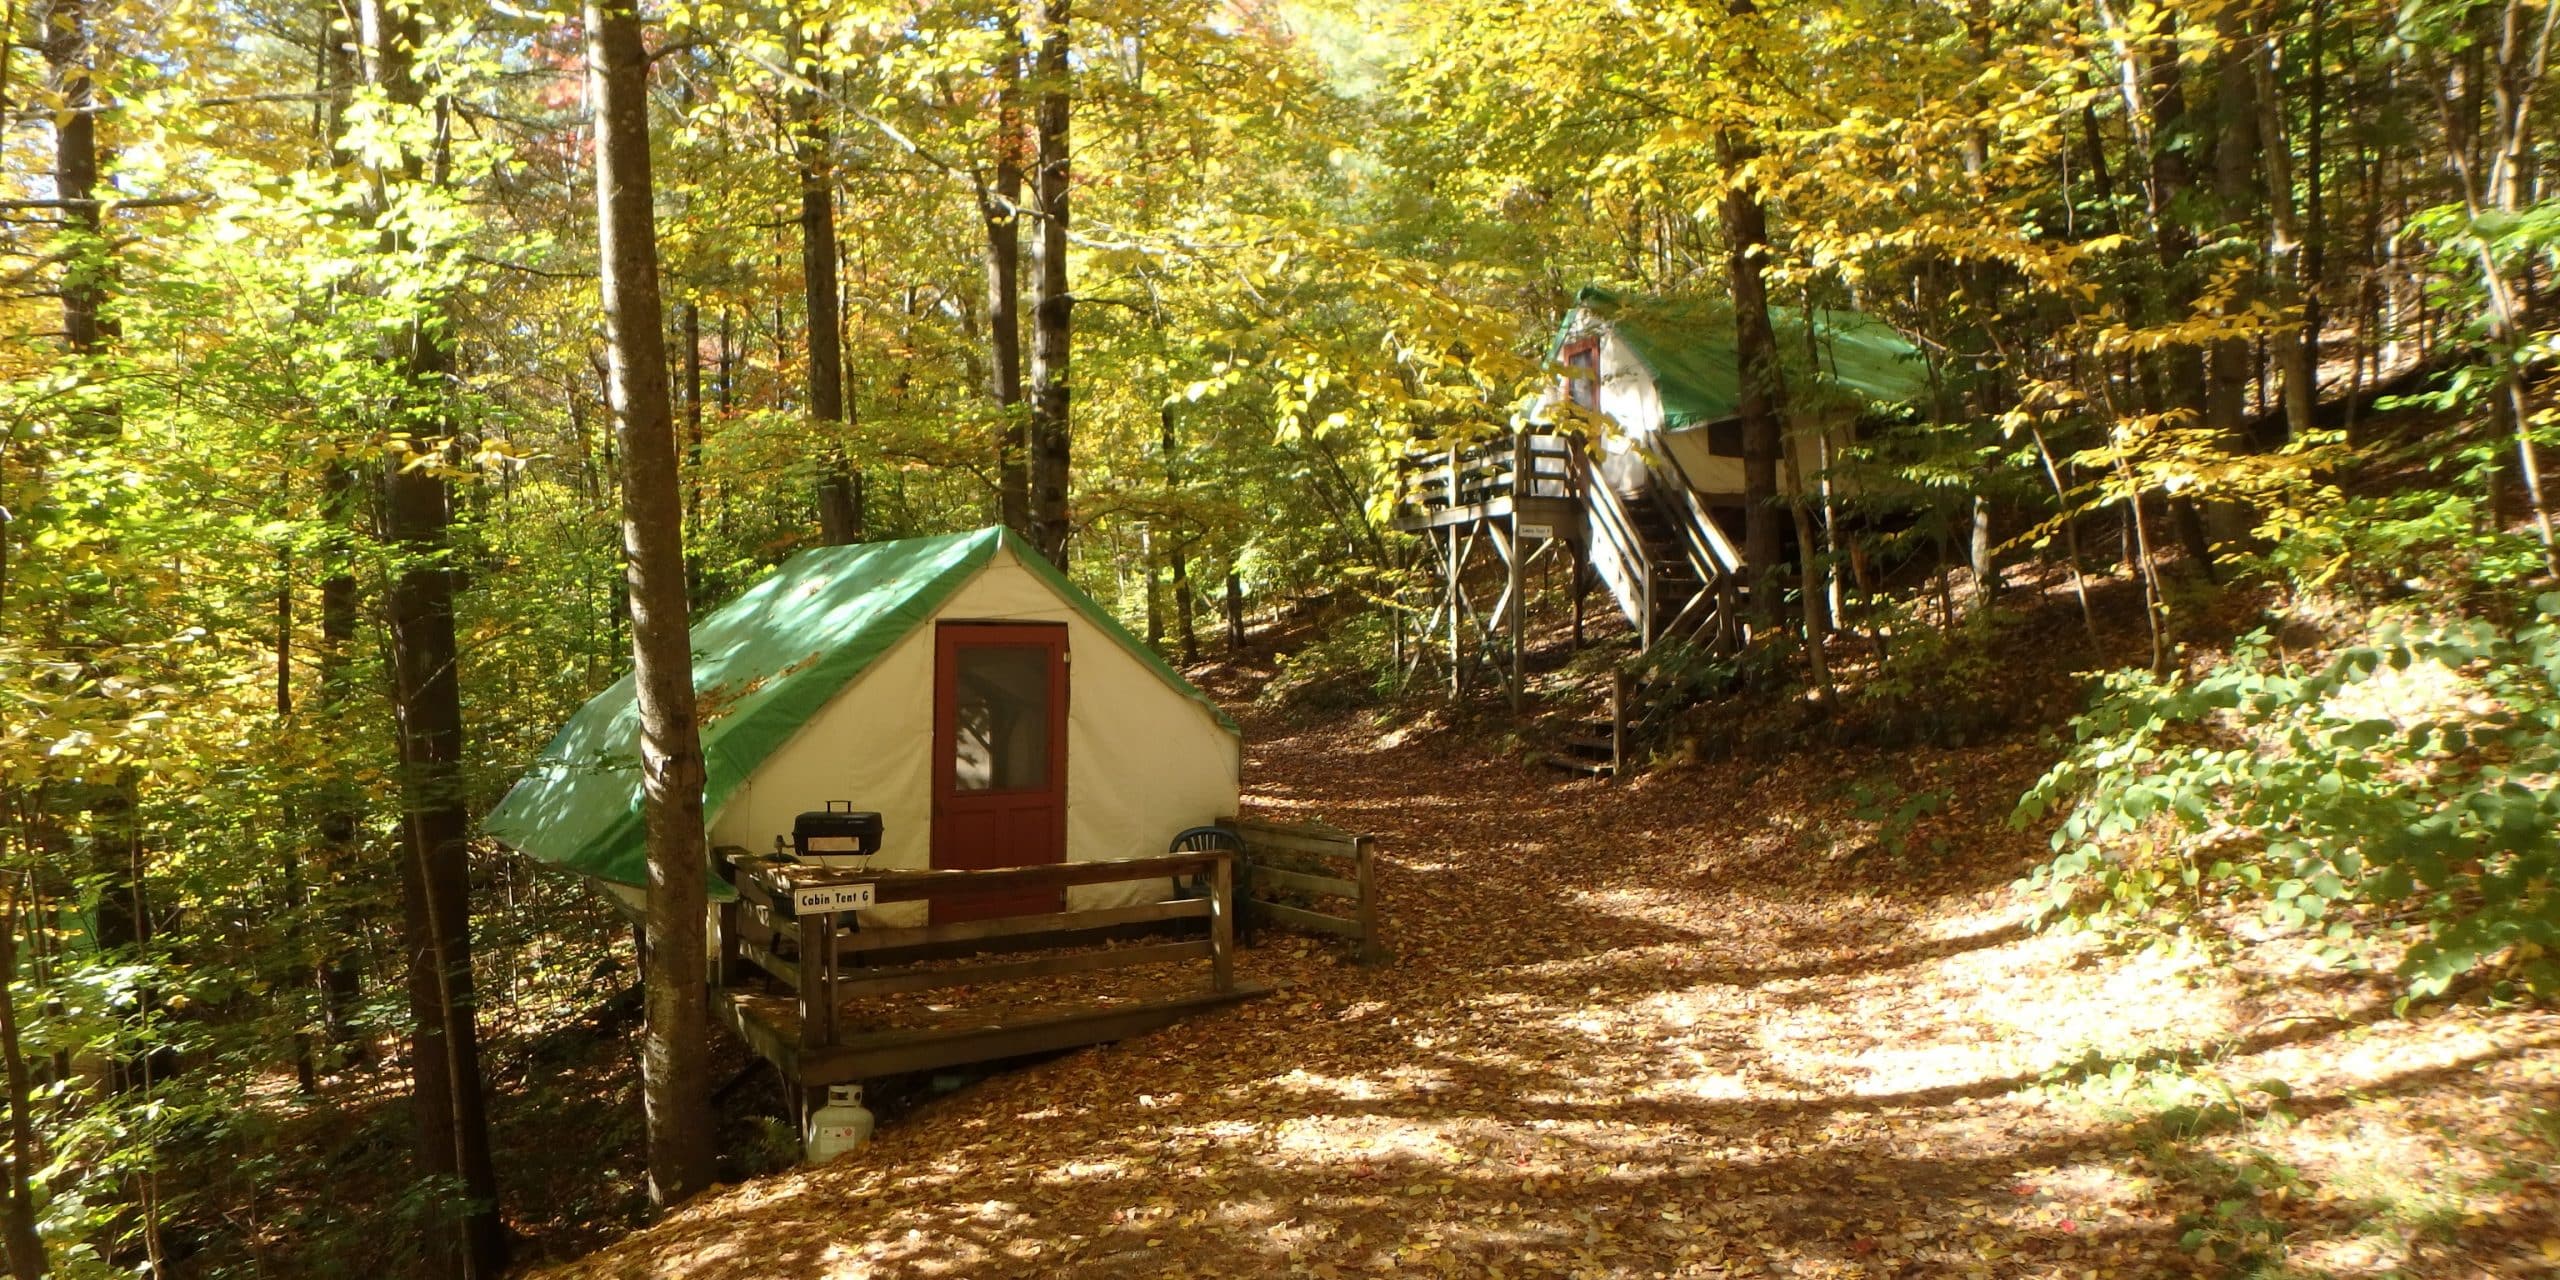 Two of the cabin tents at Zoar Outdoor